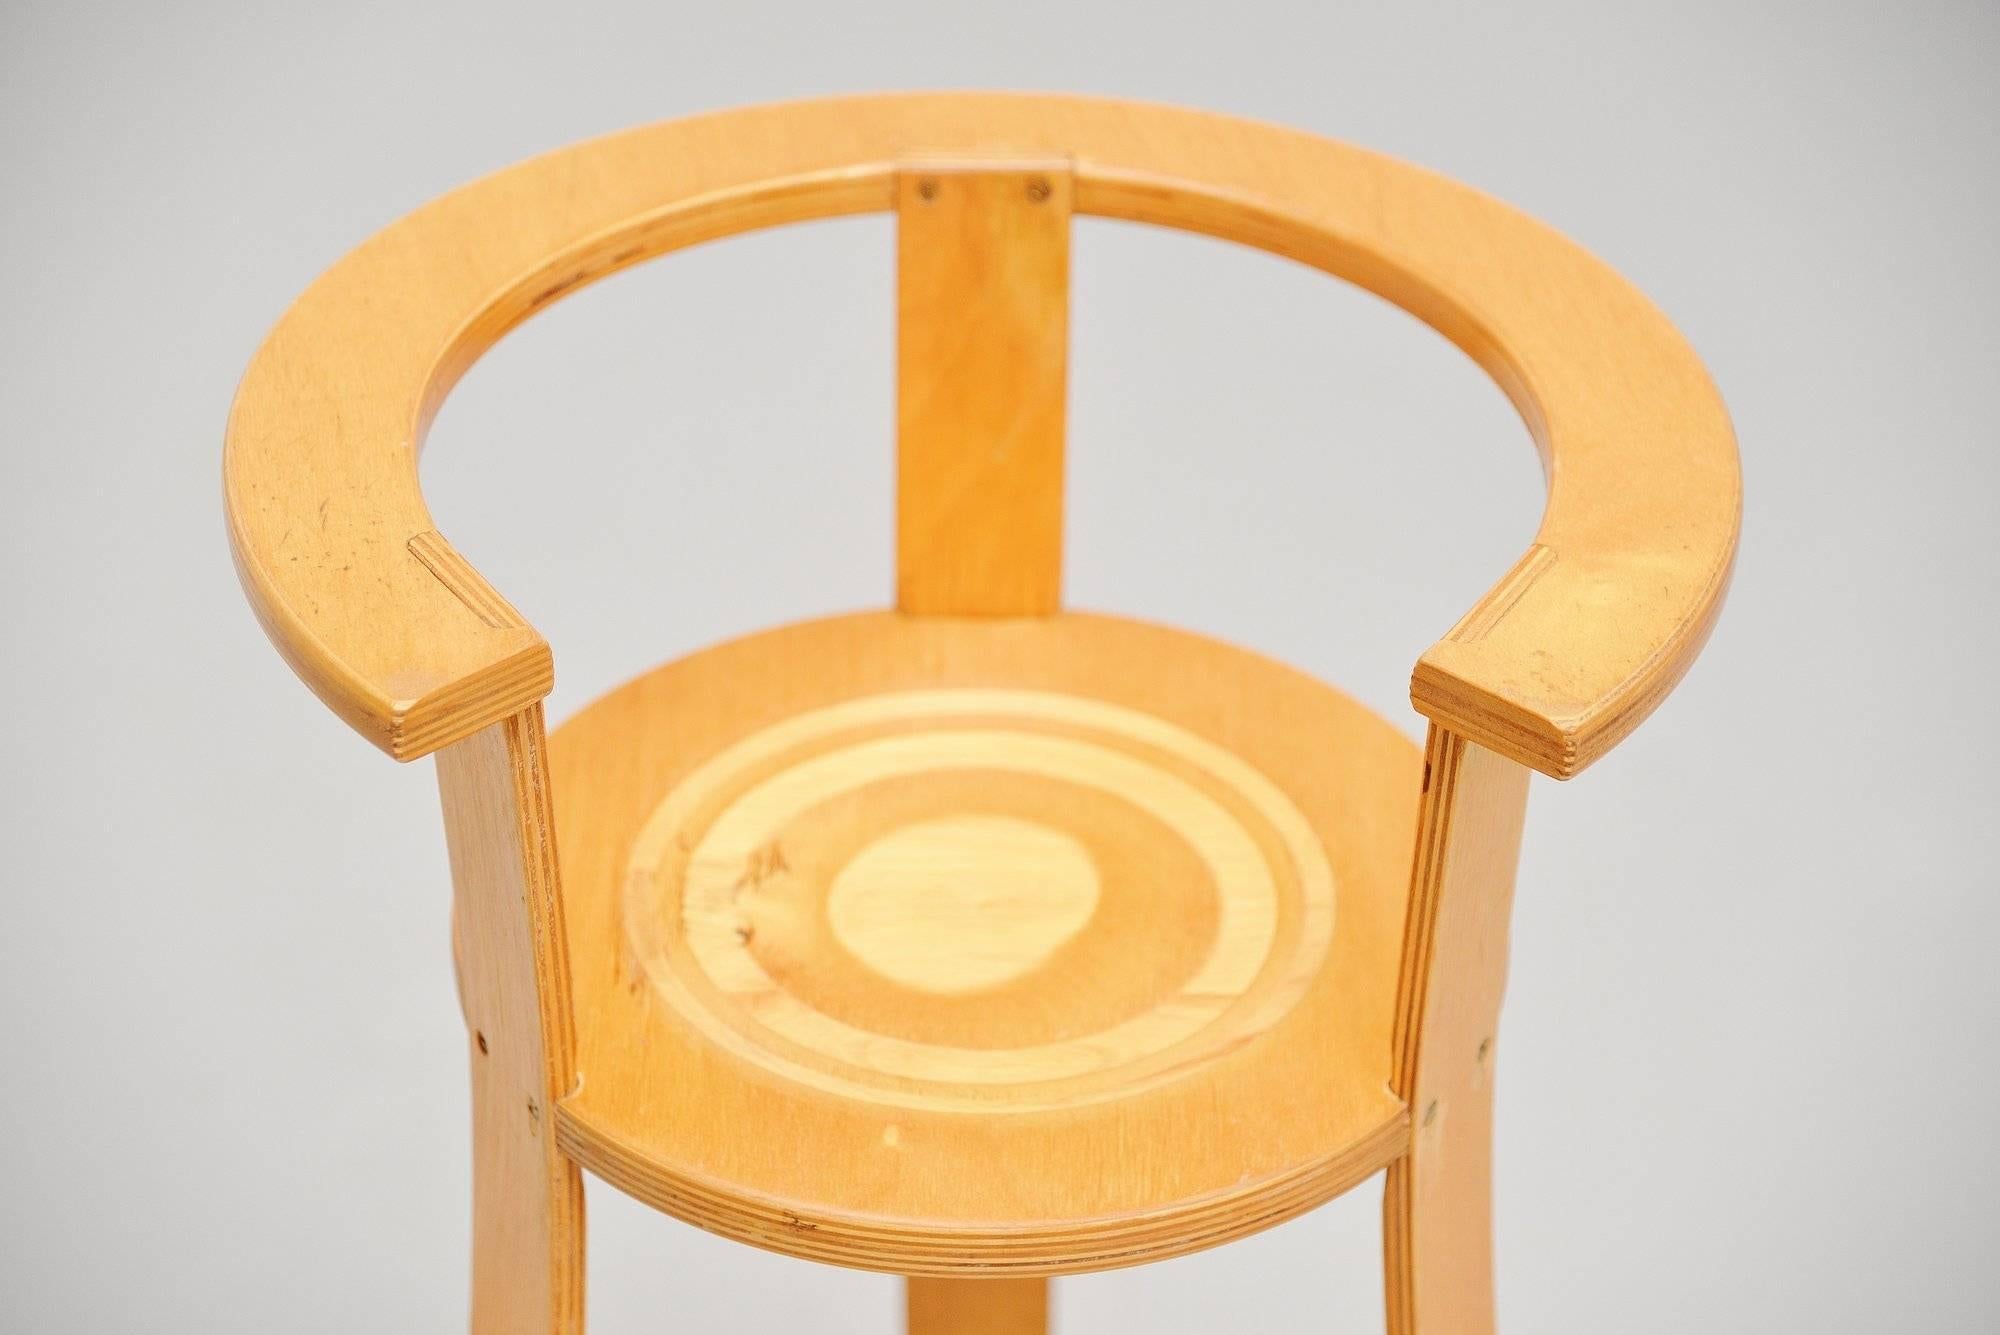 Nice and rare high kids chair designed by Gunnar Daan for his own children in 1966 when Metz & Co took it in production afterwards. The chair is made of birch plywood and due to several sized circles the chair could be made out of one sheet of